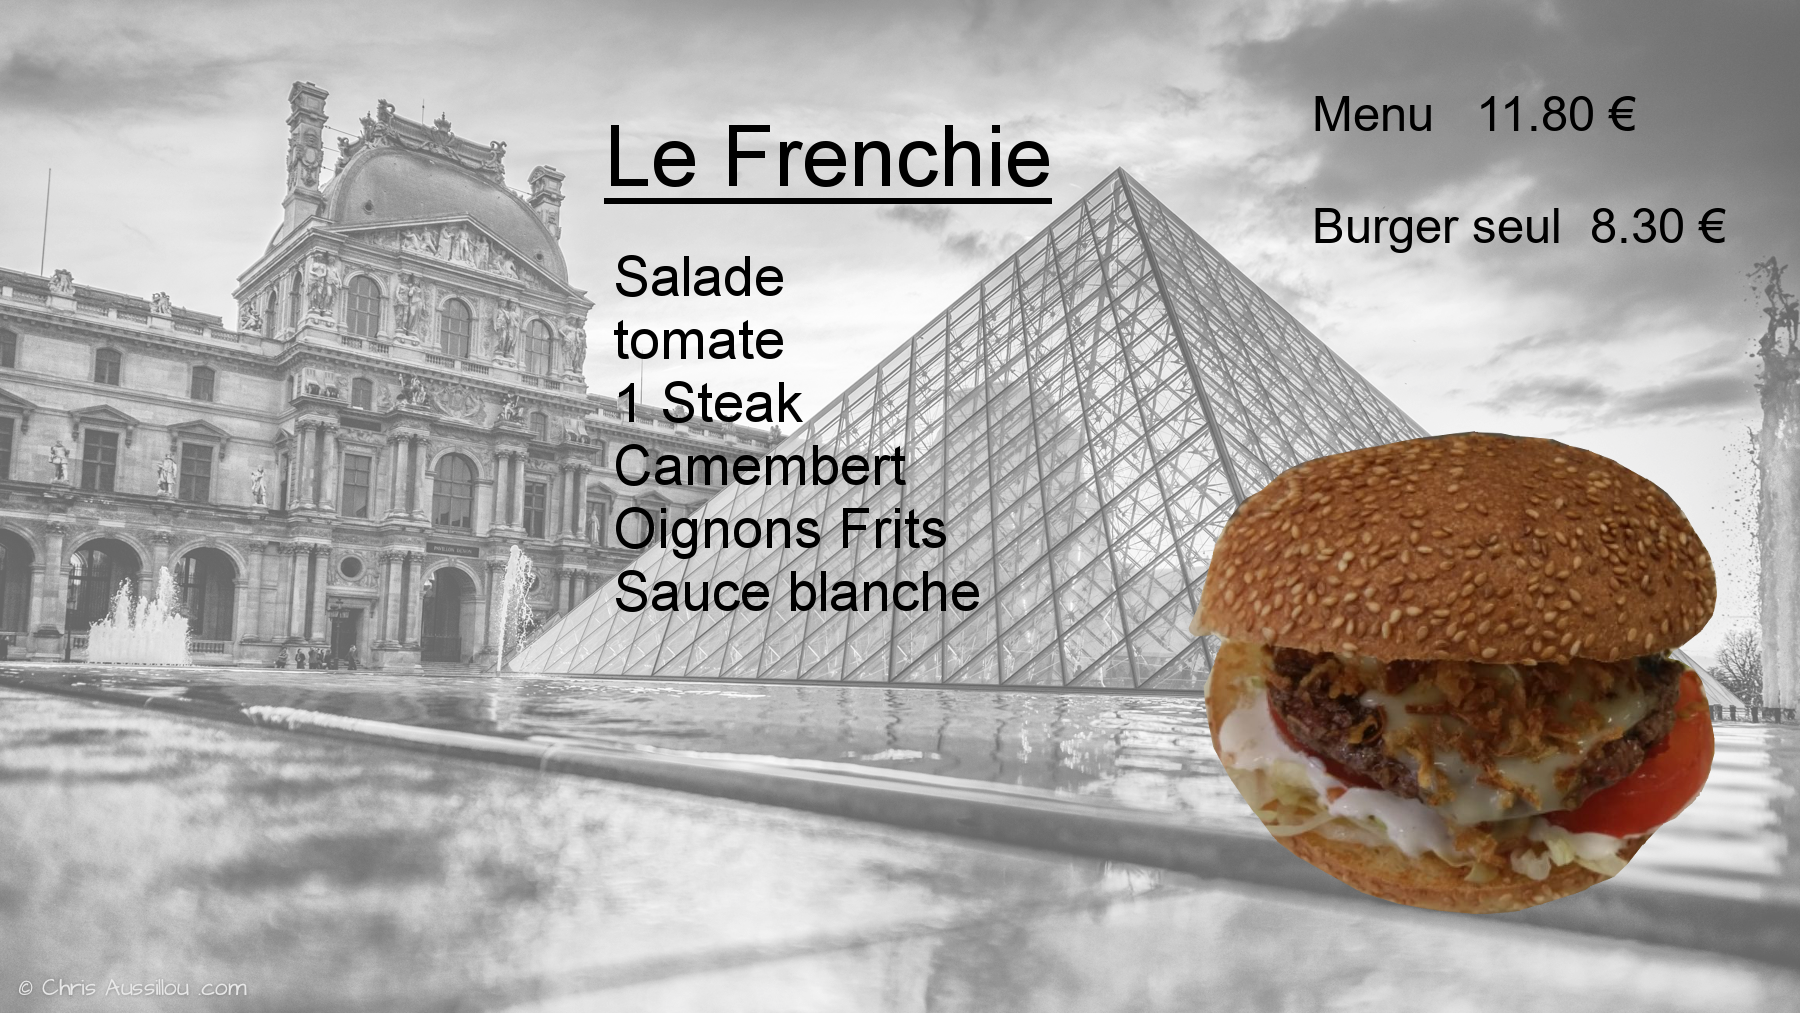 Le frenchie3